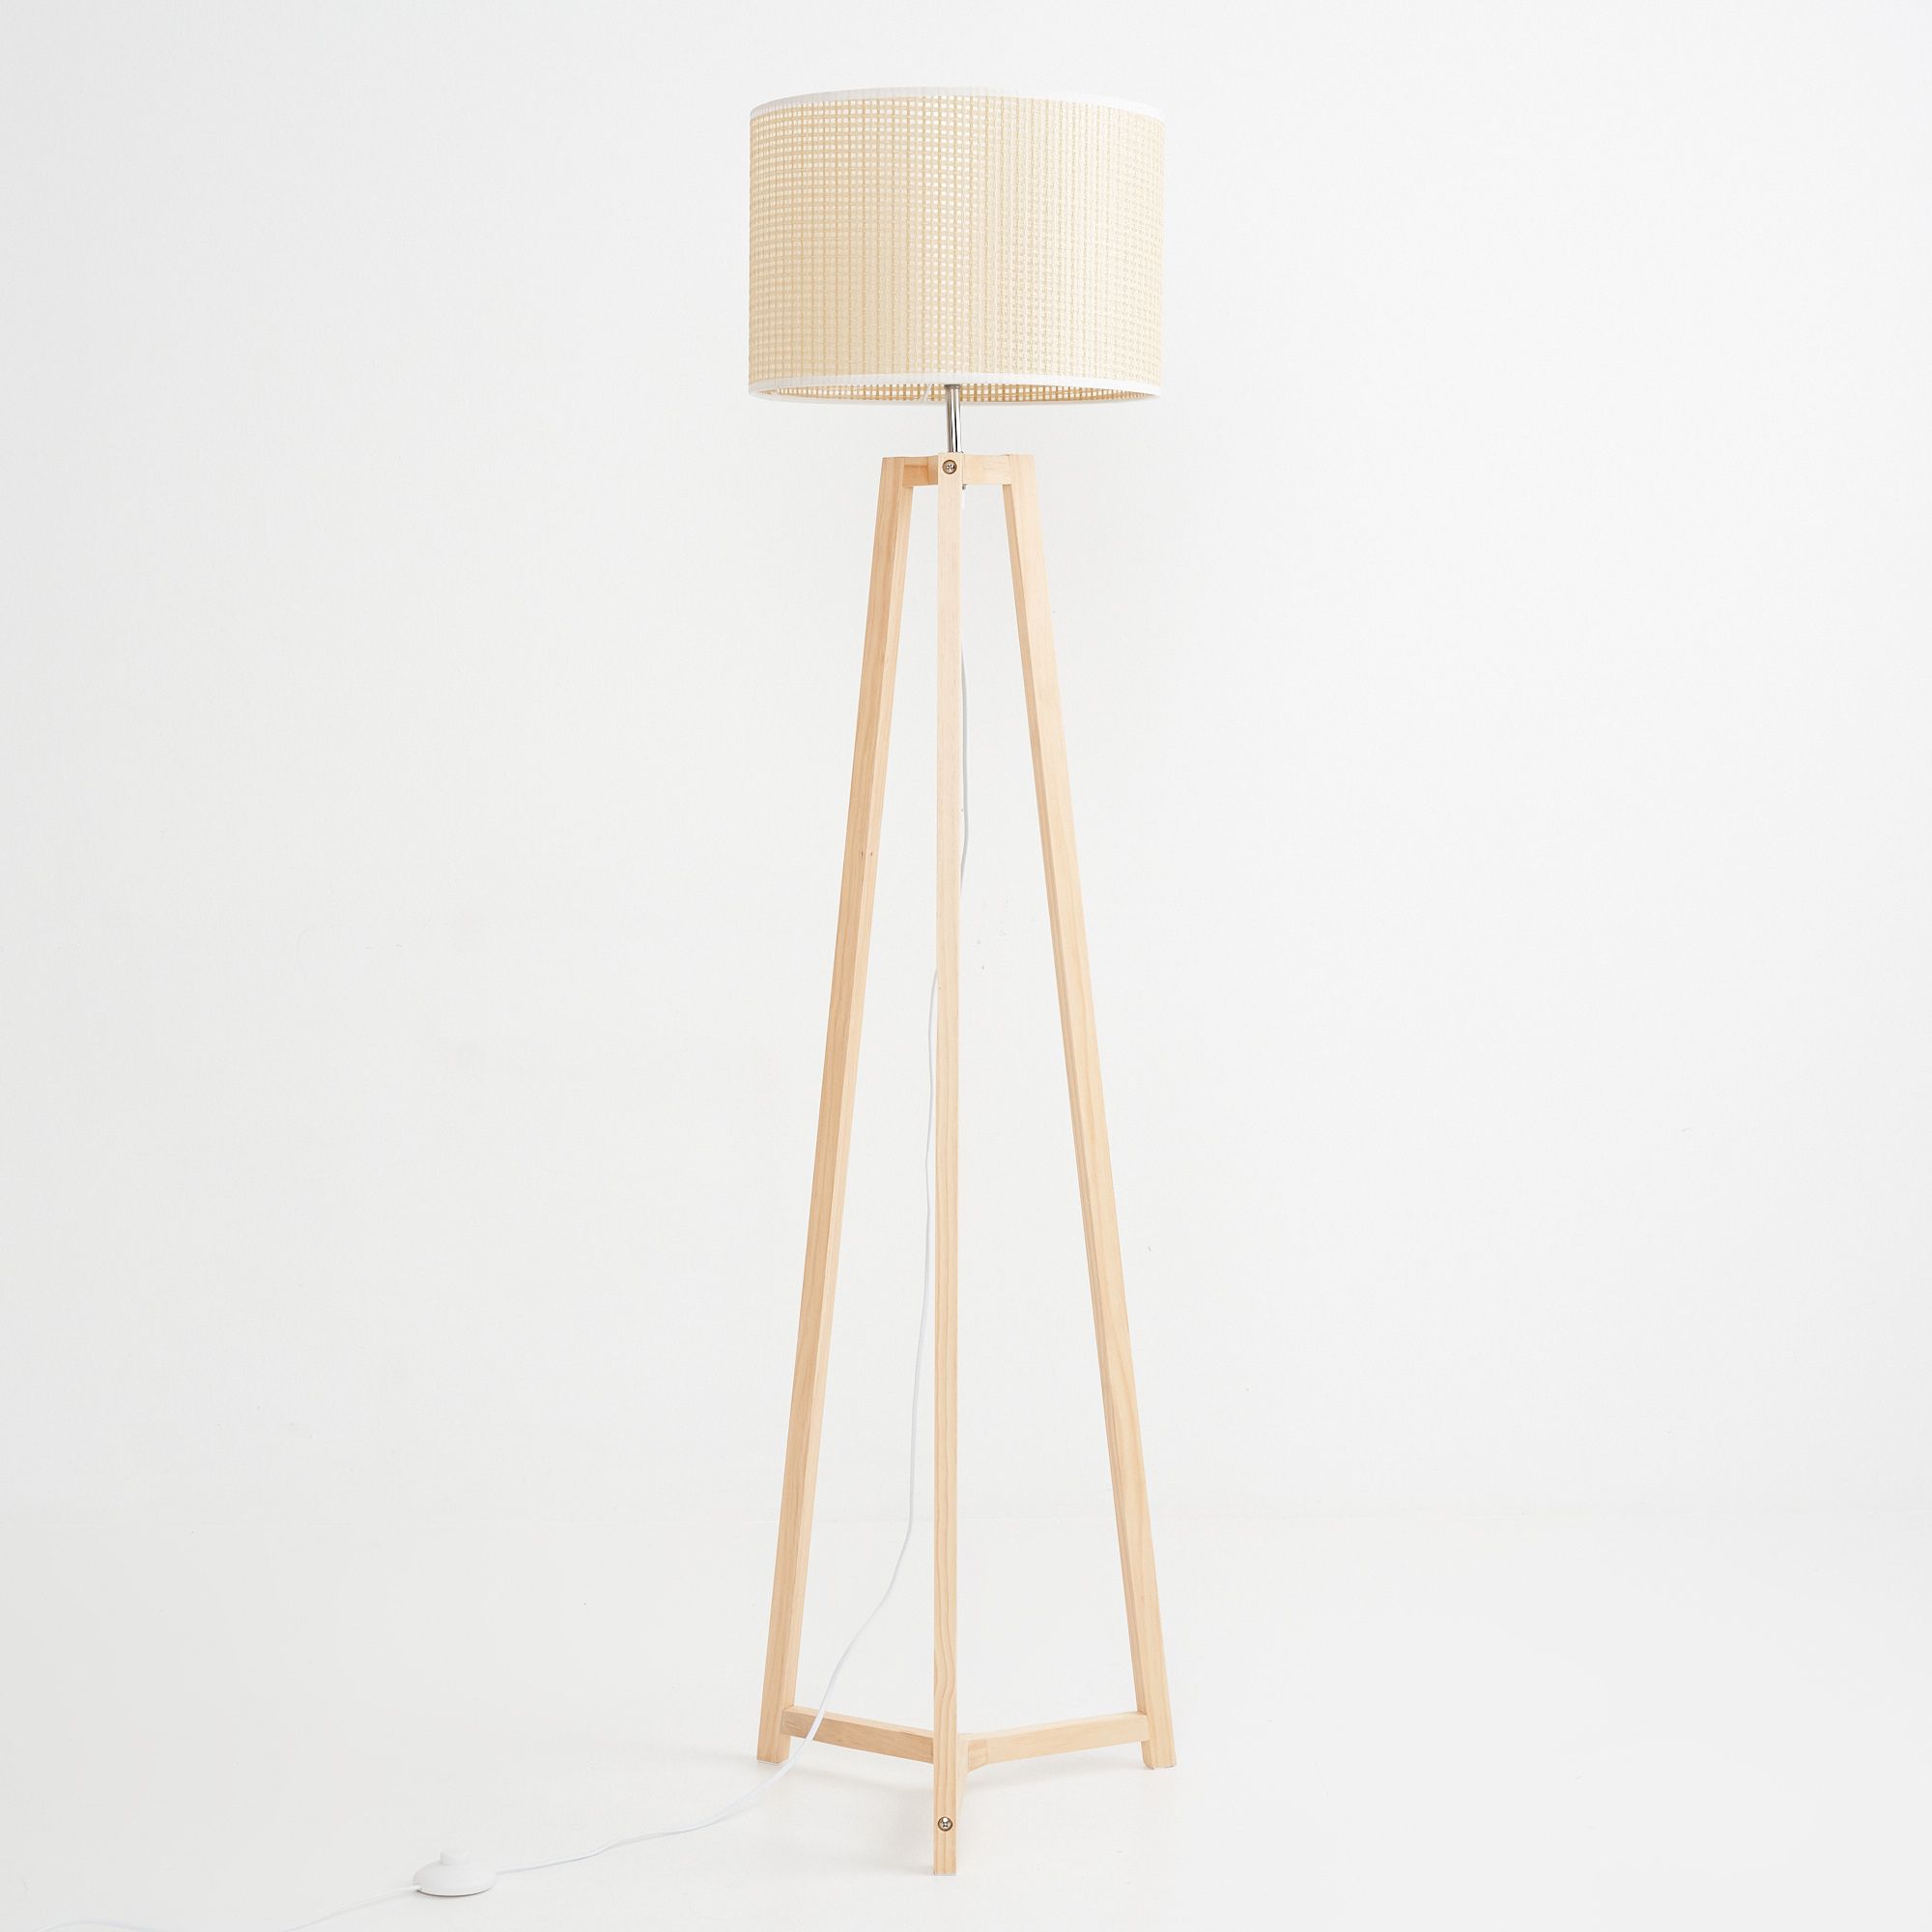 [%39% Off On Natural Woven Standing Lamp | Onedayonly Regarding Famous Natural Woven Standing Lamps|natural Woven Standing Lamps Pertaining To Favorite 39% Off On Natural Woven Standing Lamp | Onedayonly|2020 Natural Woven Standing Lamps In 39% Off On Natural Woven Standing Lamp | Onedayonly|recent 39% Off On Natural Woven Standing Lamp | Onedayonly Intended For Natural Woven Standing Lamps%] (View 6 of 15)